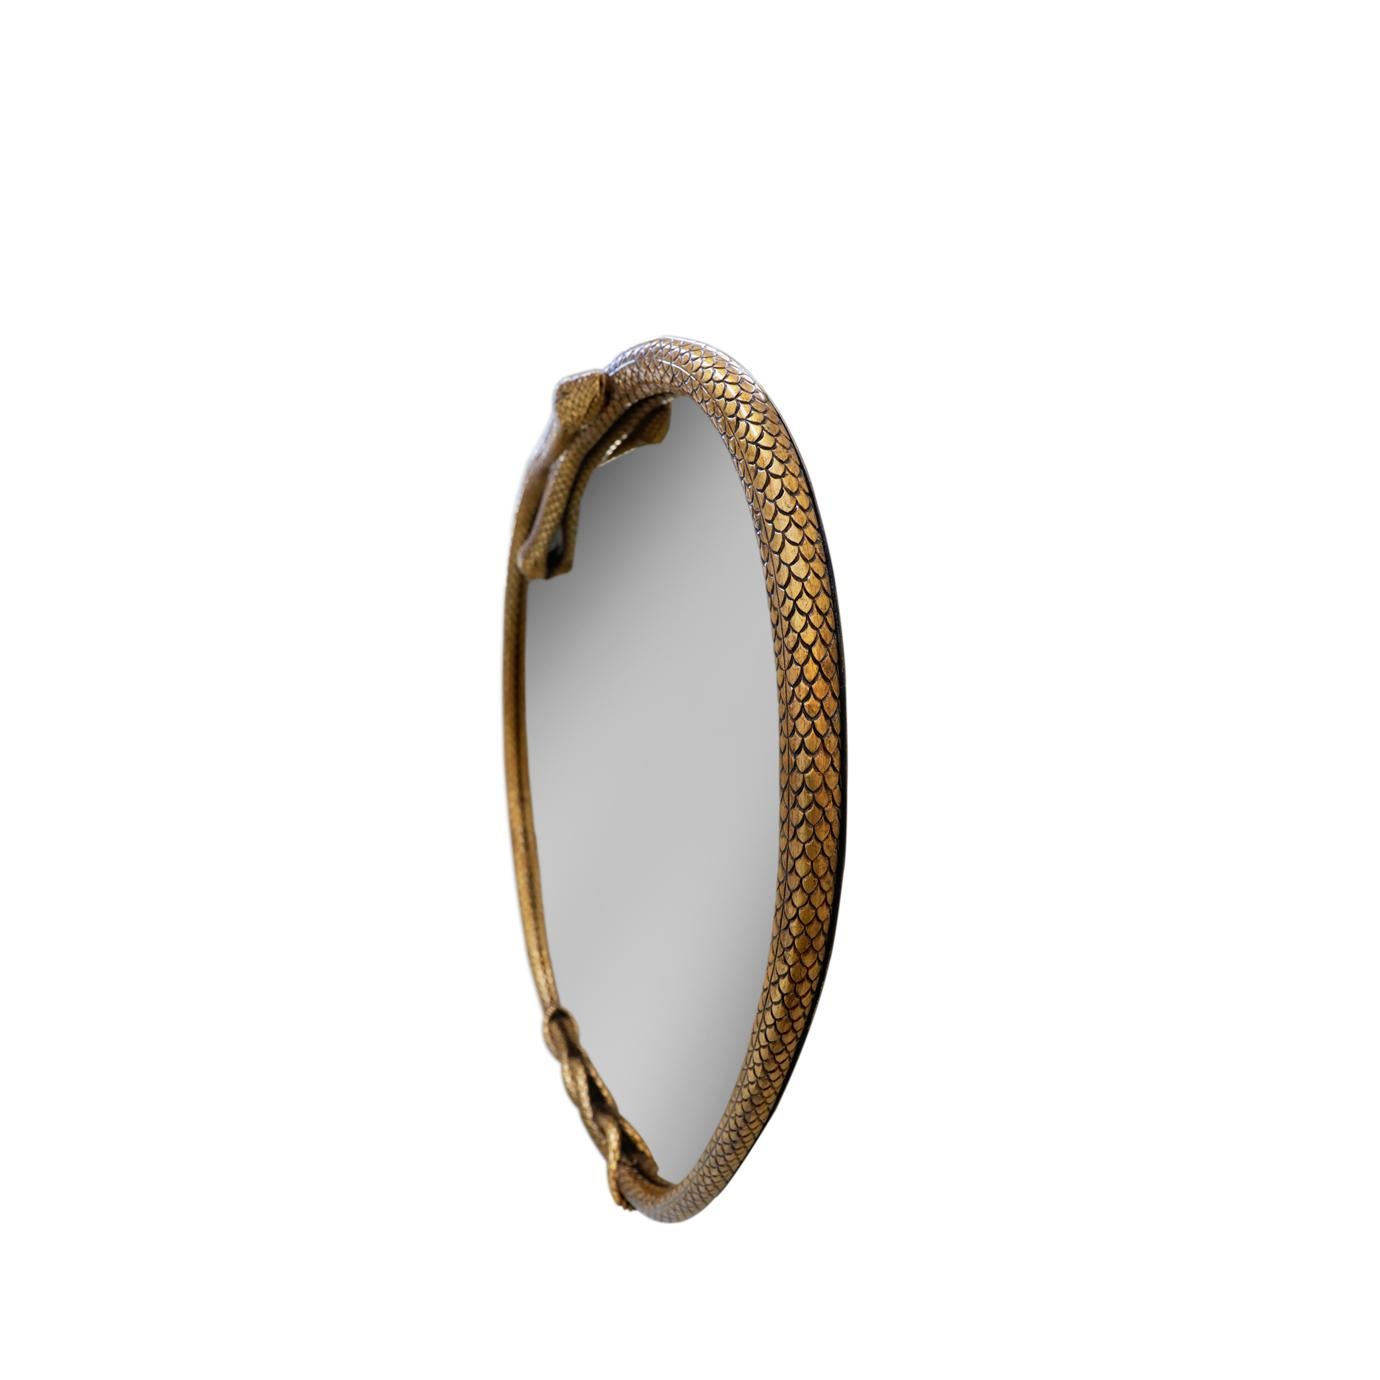 Be transformed as you gaze into the Serpentine II's apple-shaped mirror. Framed in two intertwined serpent forms made of hand-carved wood this mirror is the perfect way to add a touch of exoticism to any interior setting.